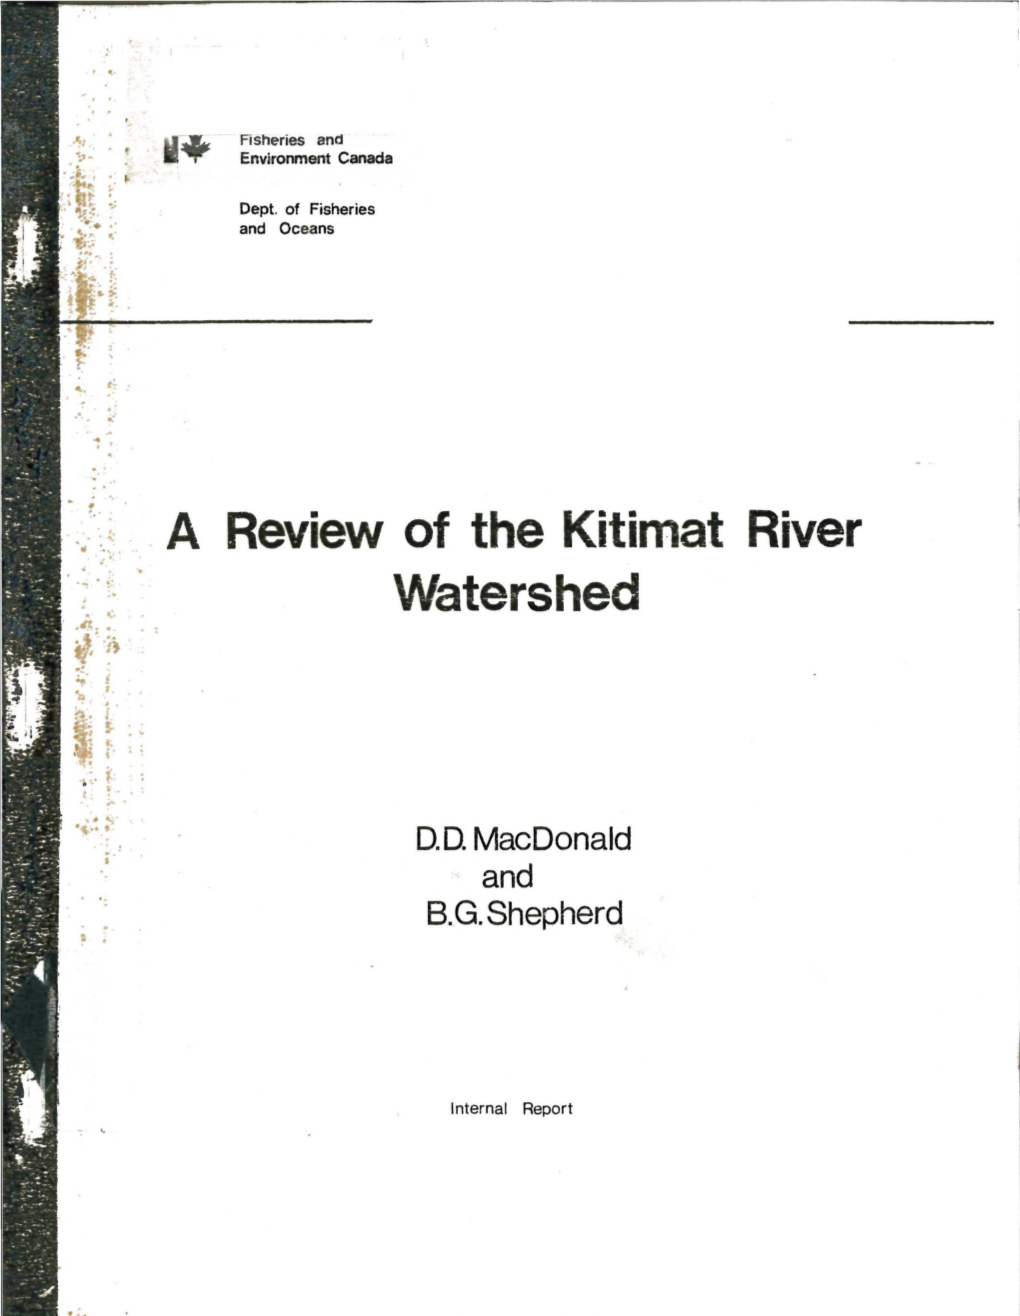 A Review of the Kitimat River